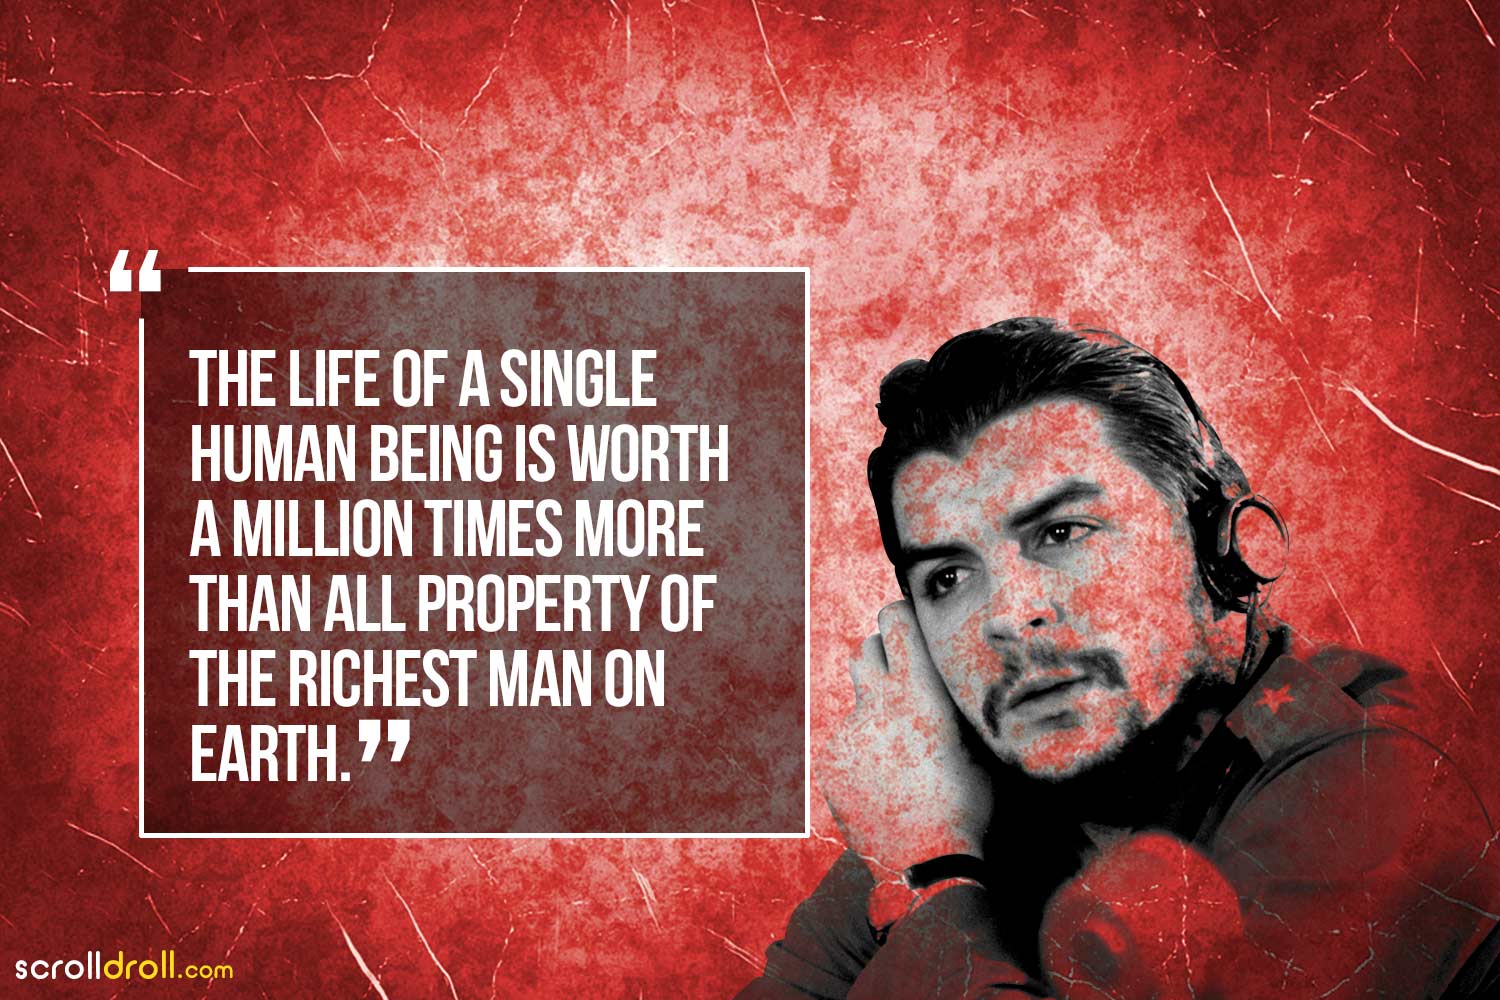 The life of a single human being is worth a million times more than all the property of the richest man on earth-Che Guevara